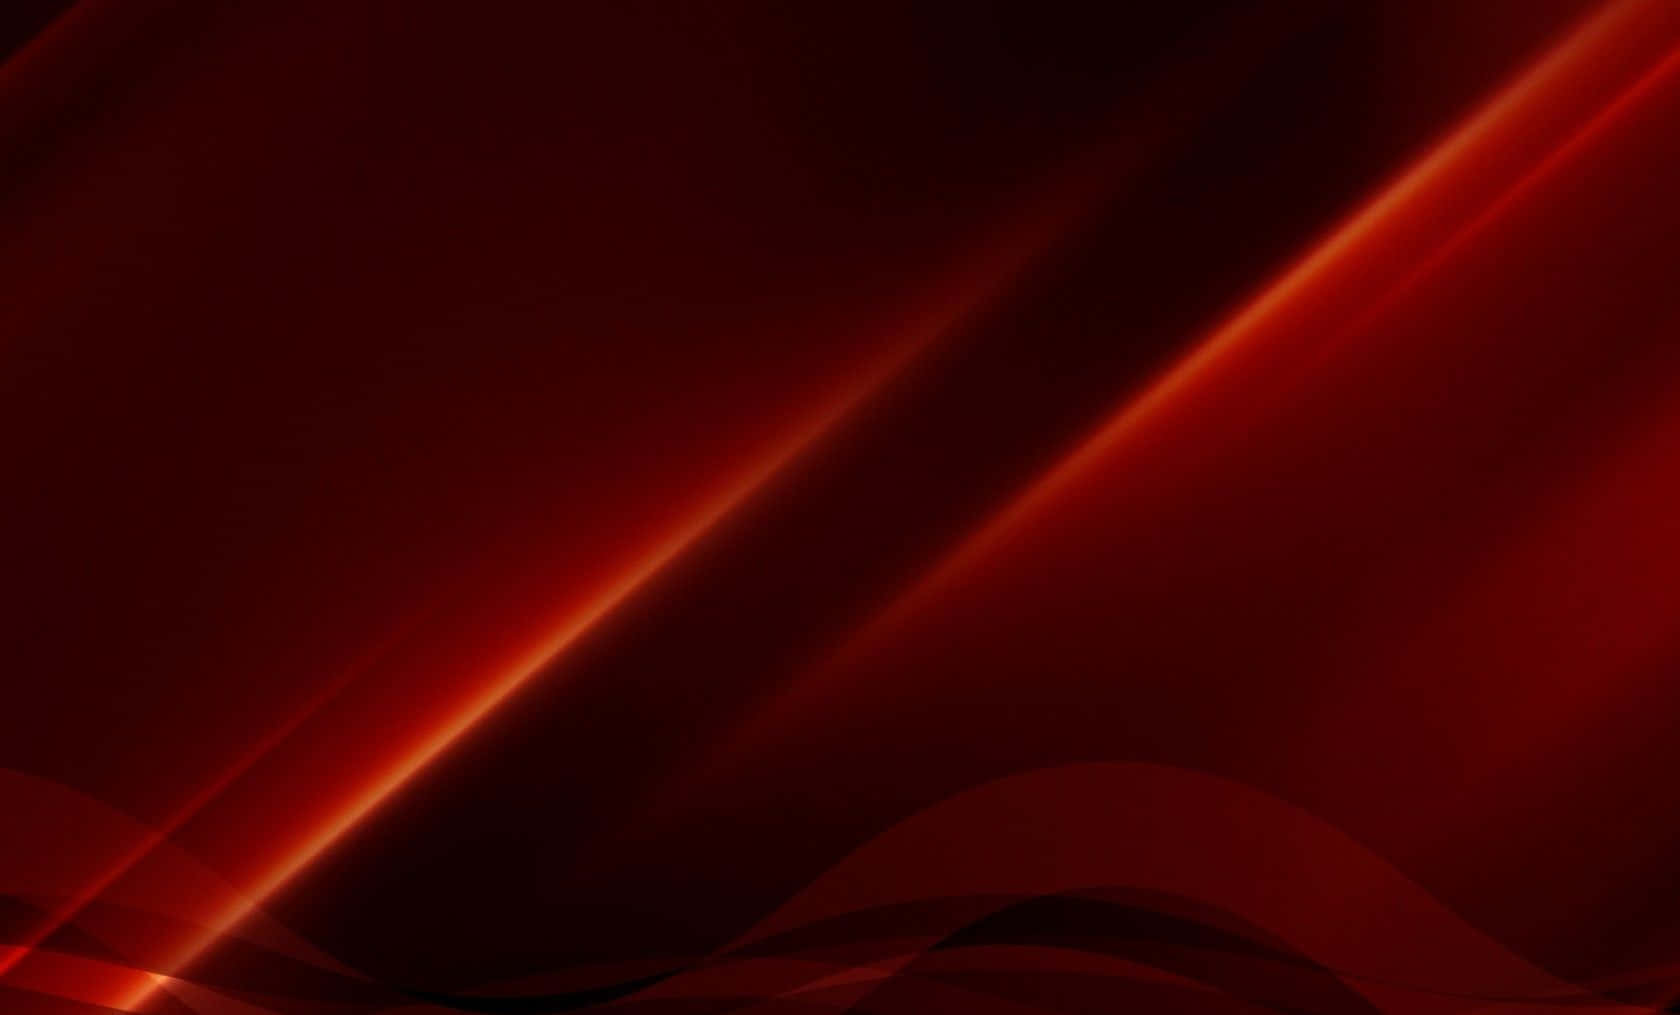 Abstract Background in Shades of Red